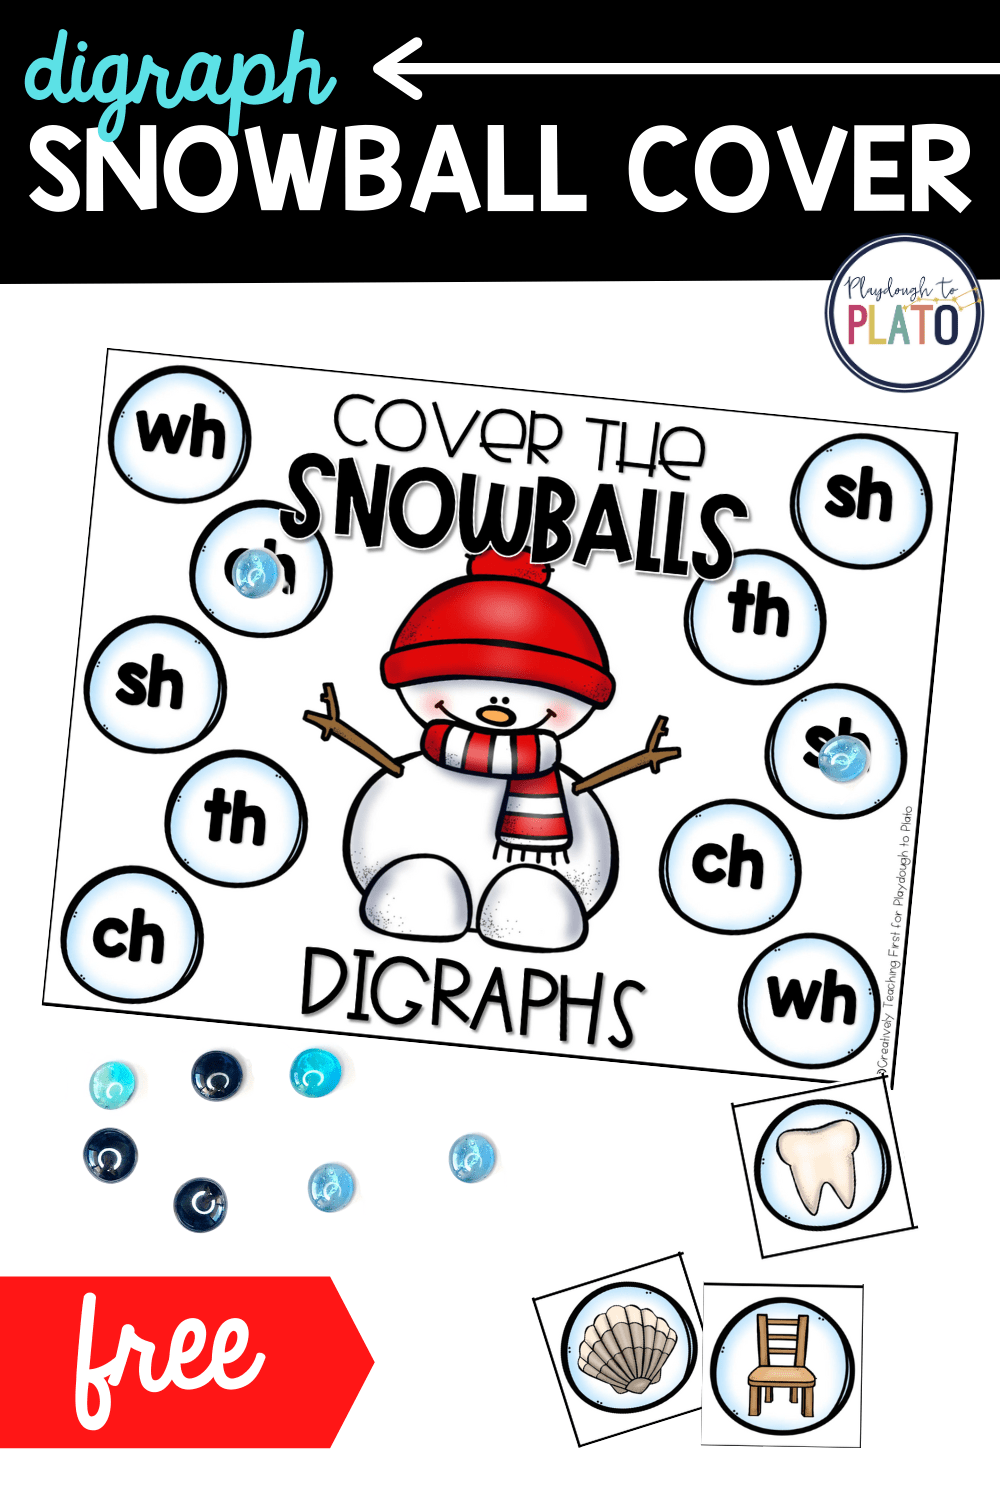 Digraph Game - Snowball Cover - Playdough To Plato